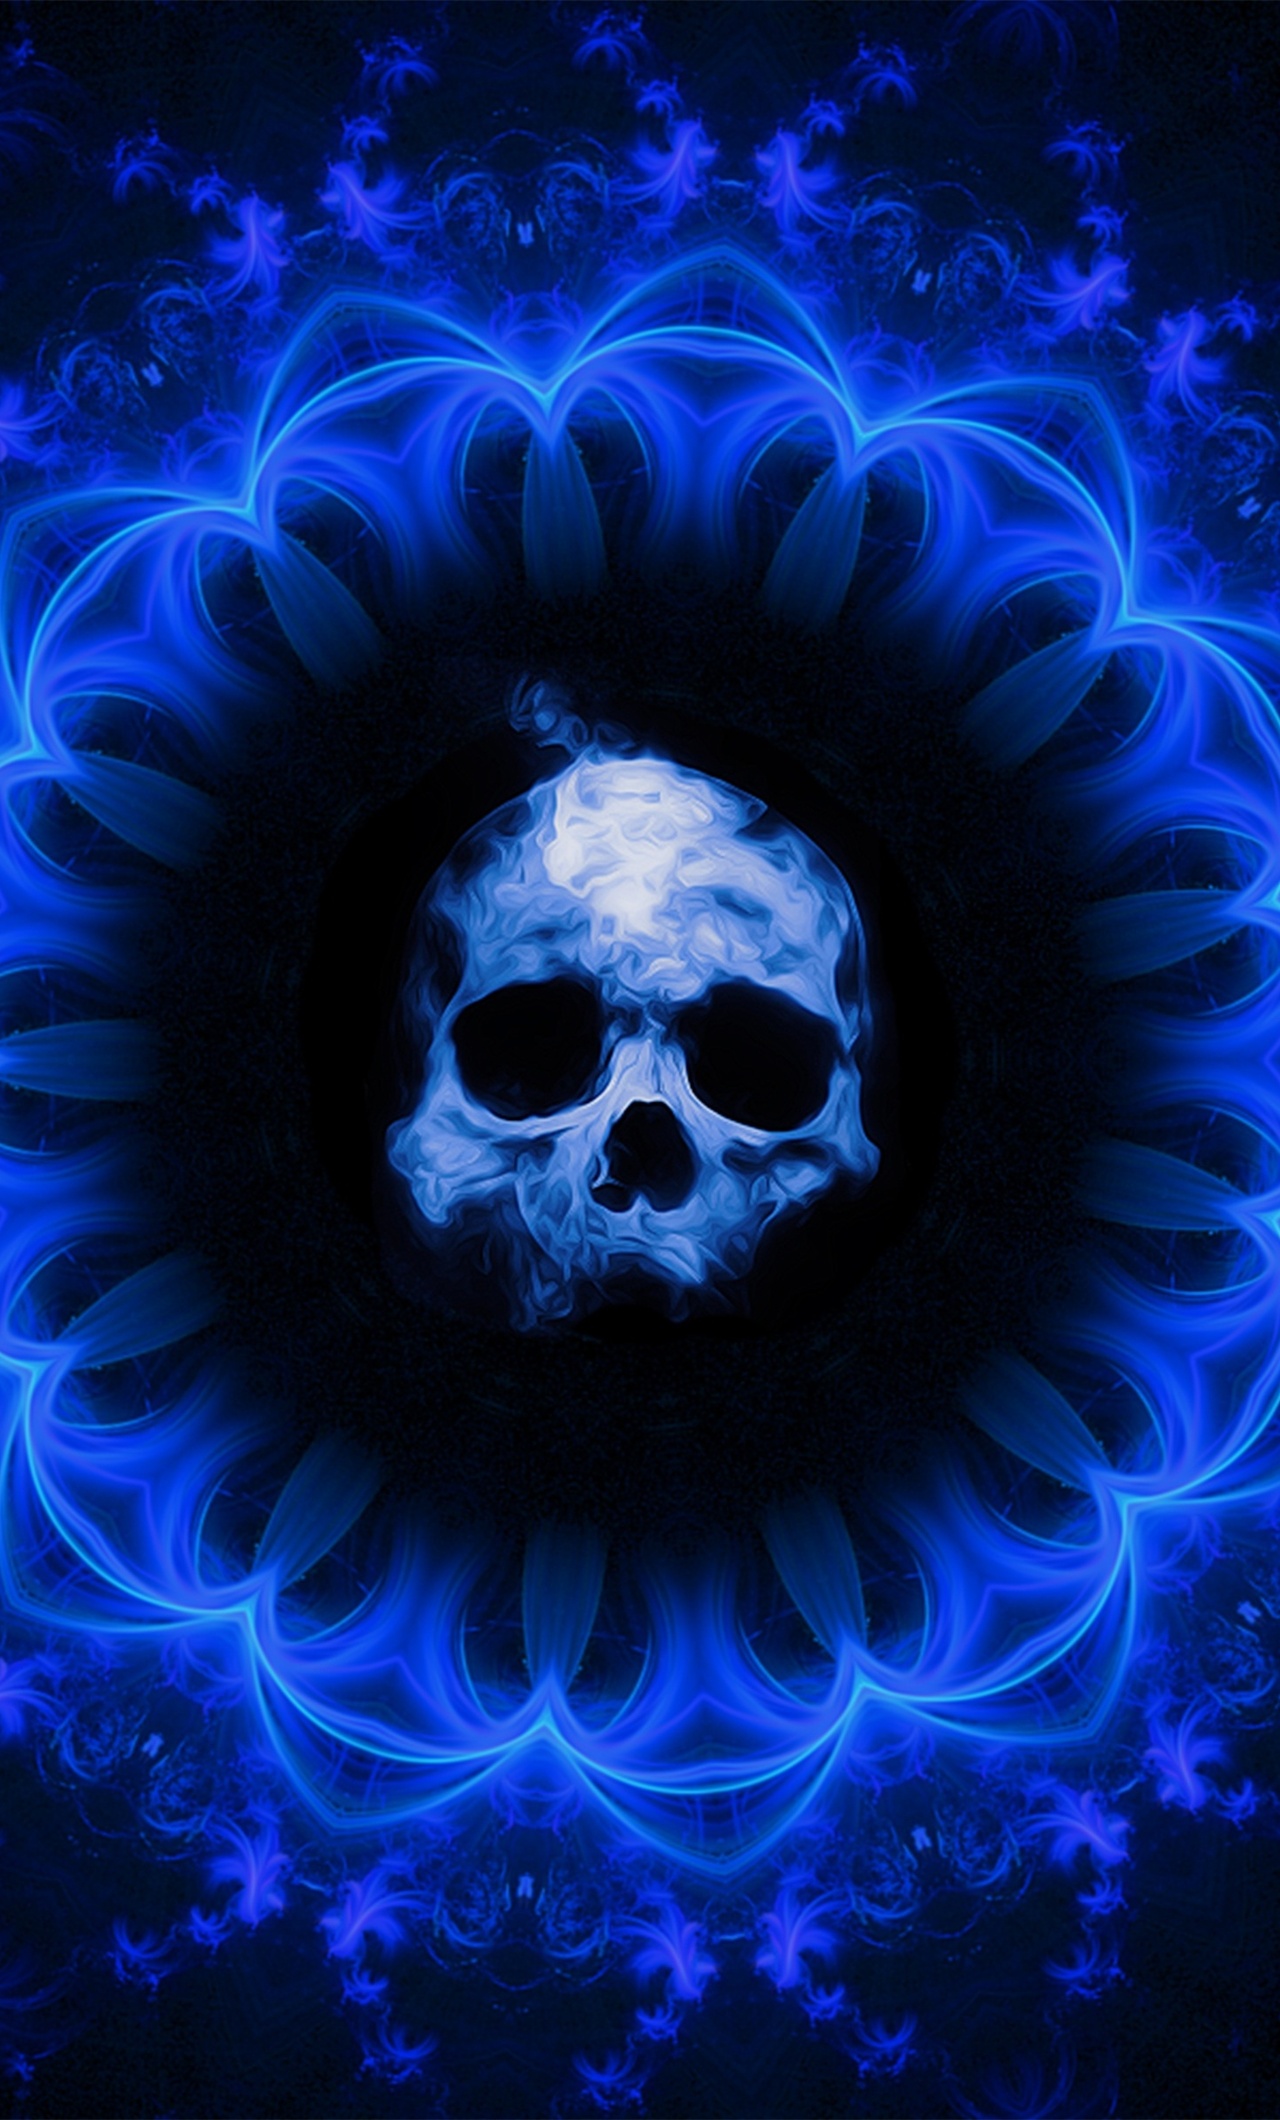 Skull Dark Blue Gothic Fantasy iPhone HD 4k Wallpaper, Image, Background, Photo and Picture